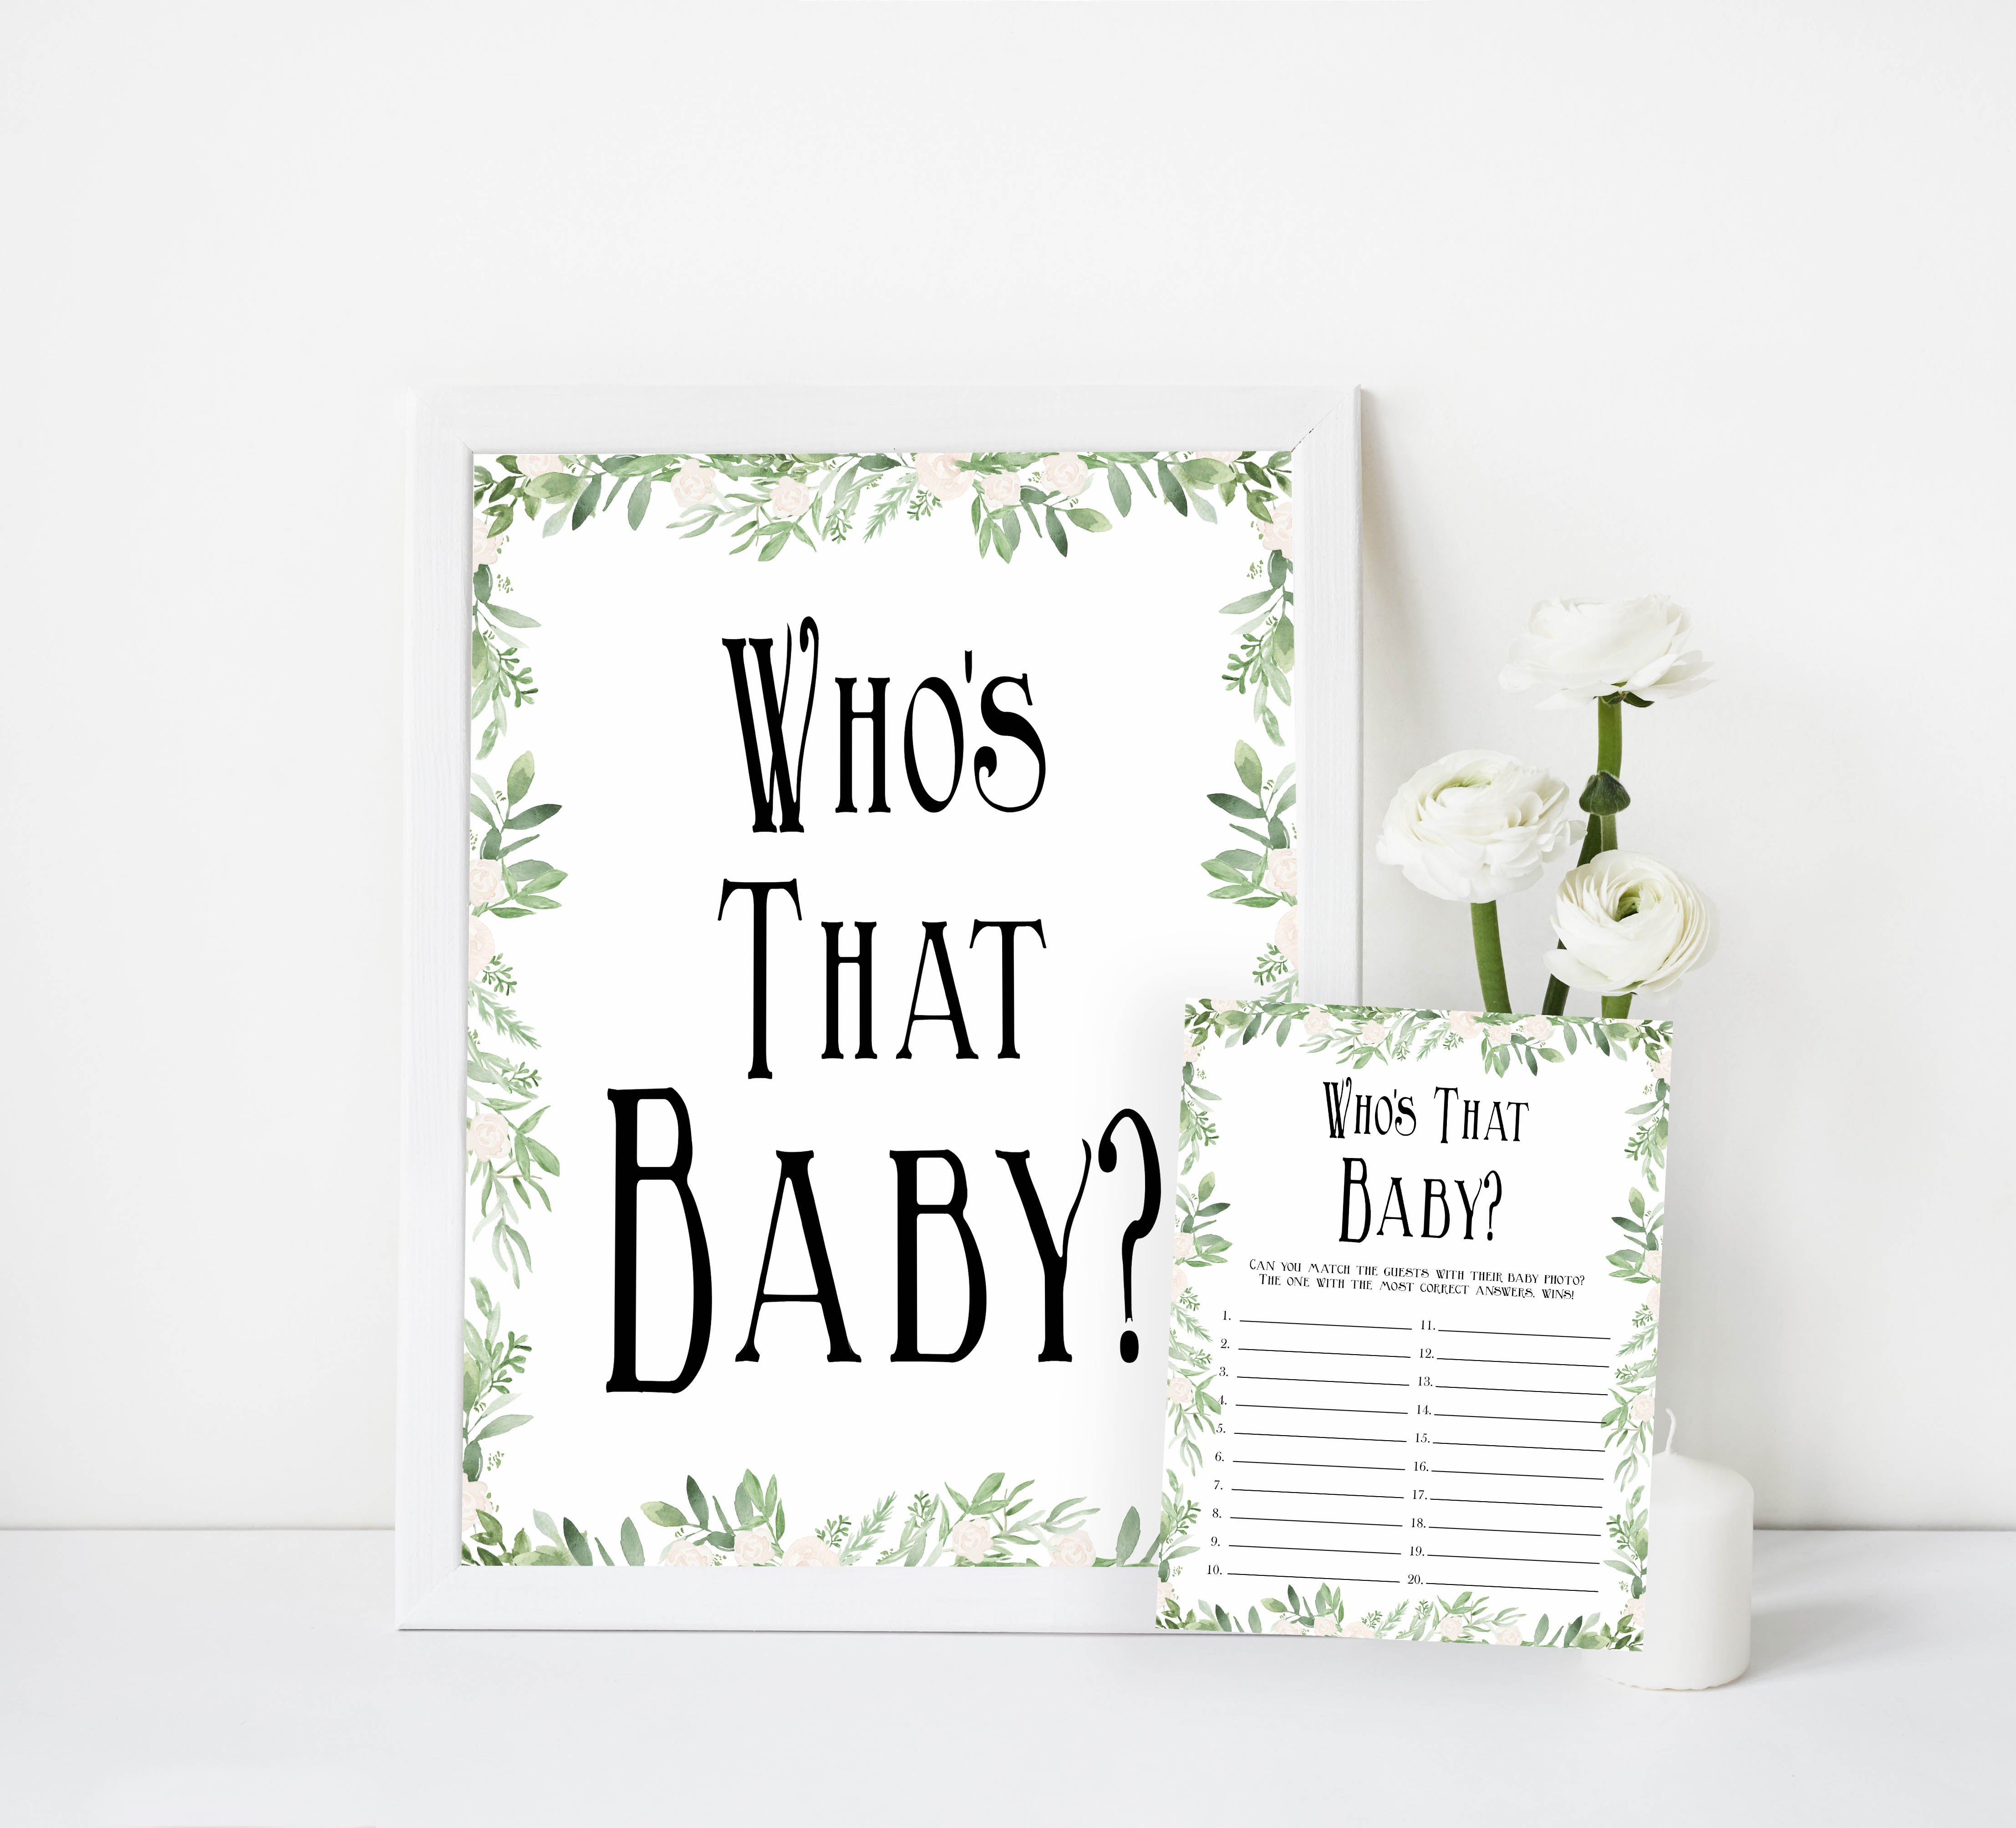 whos that baby game, guess the baby photo game, Printable baby shower games, greenery baby shower games, fun floral baby games, botanical baby shower games,